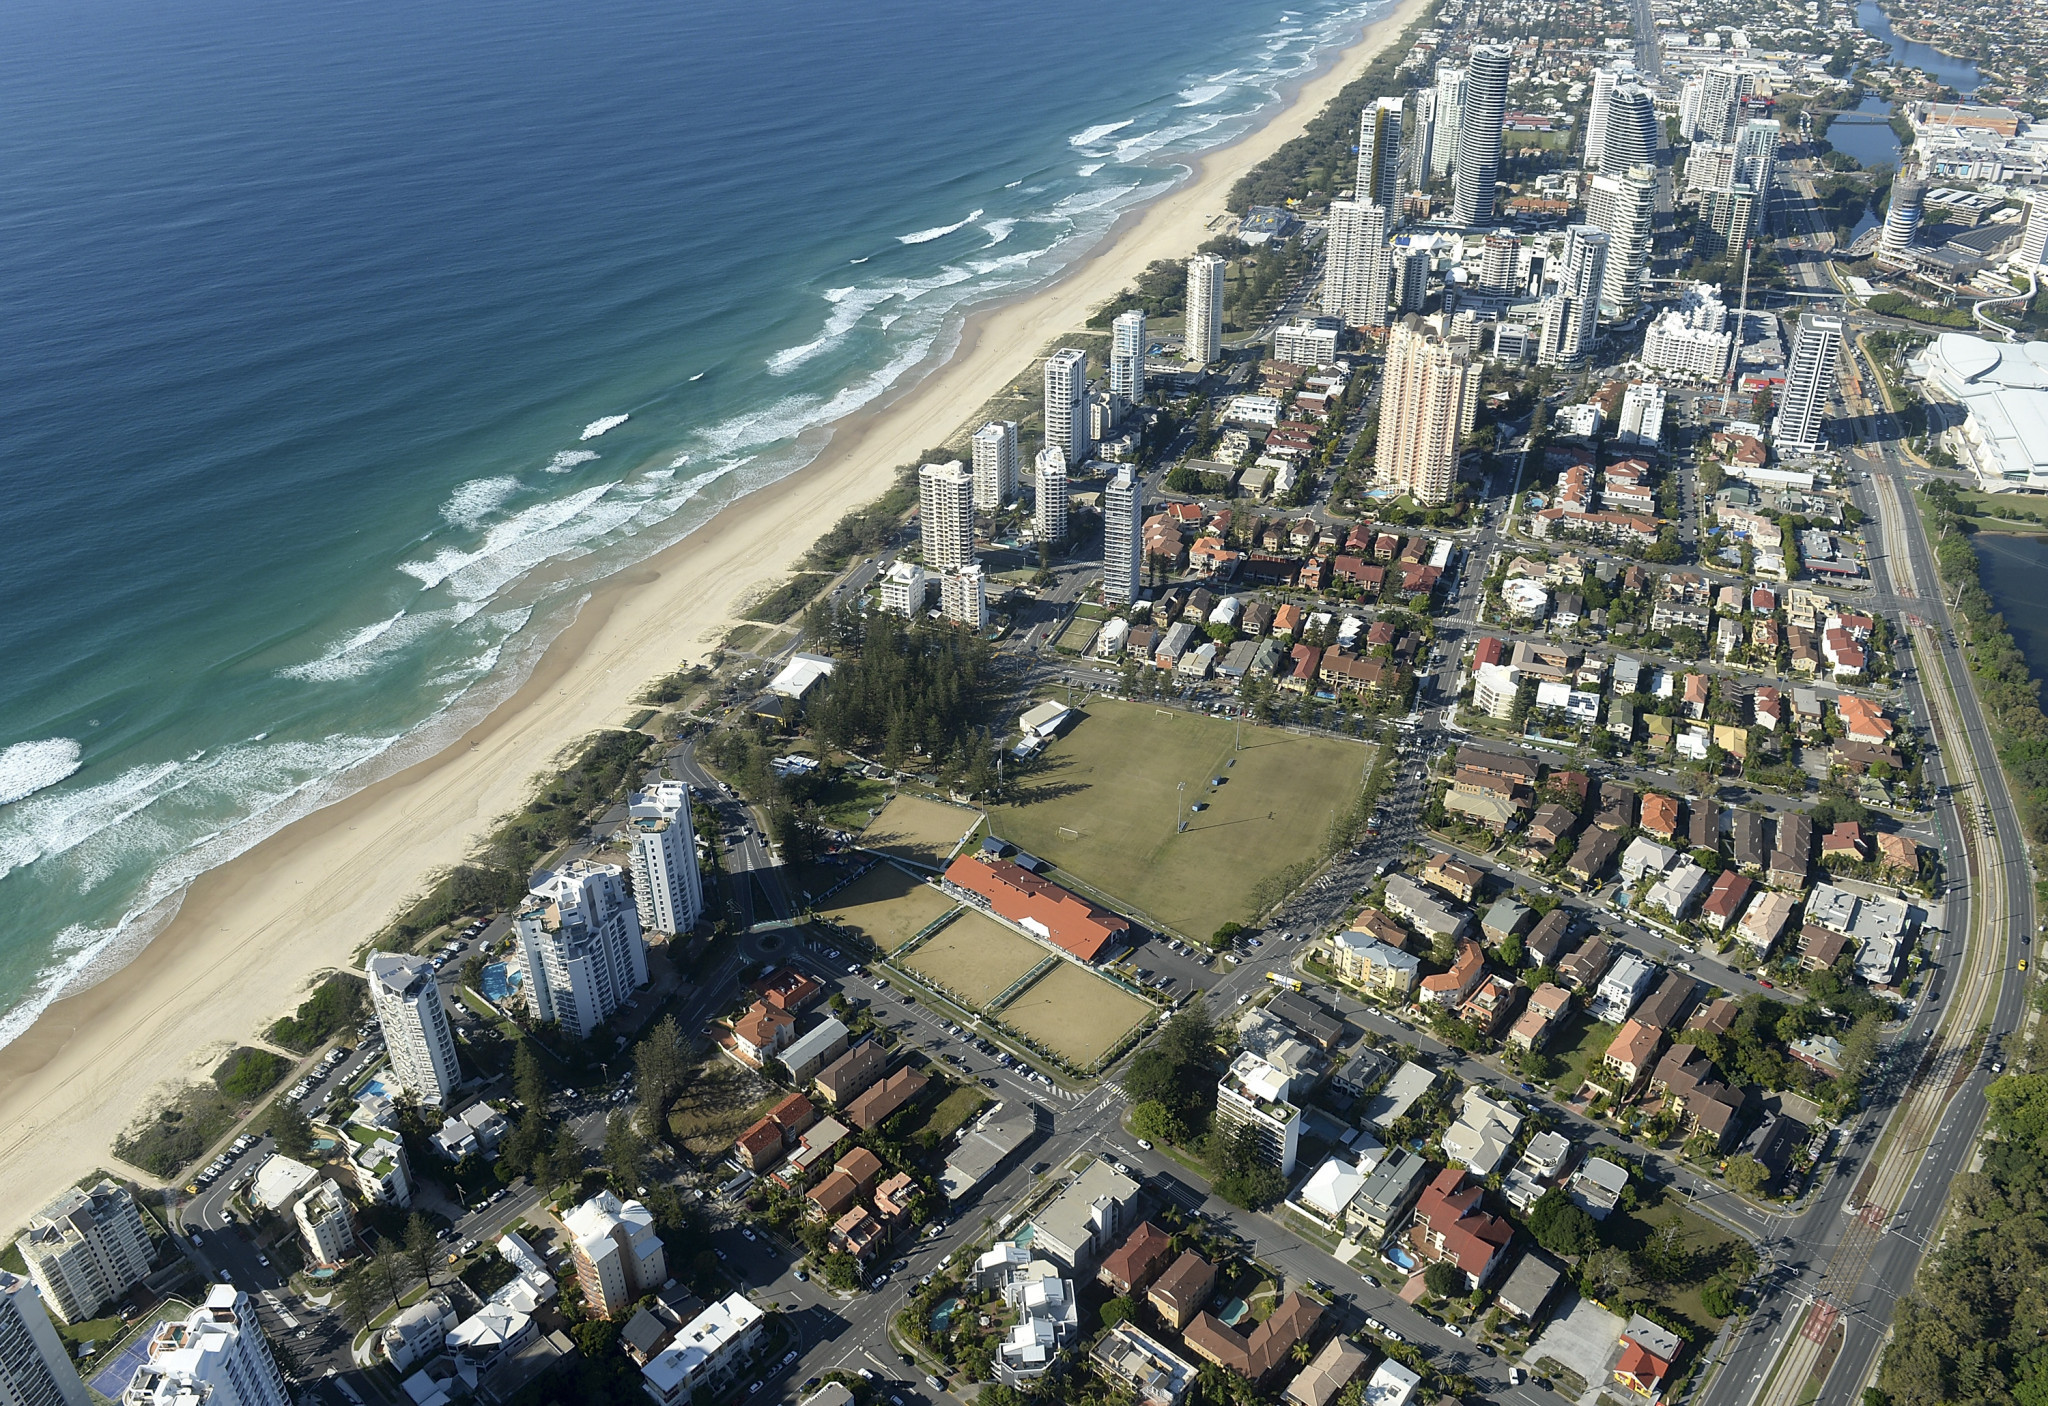 The competition will take place at a Gold Coast 2018 venue ©Getty Images